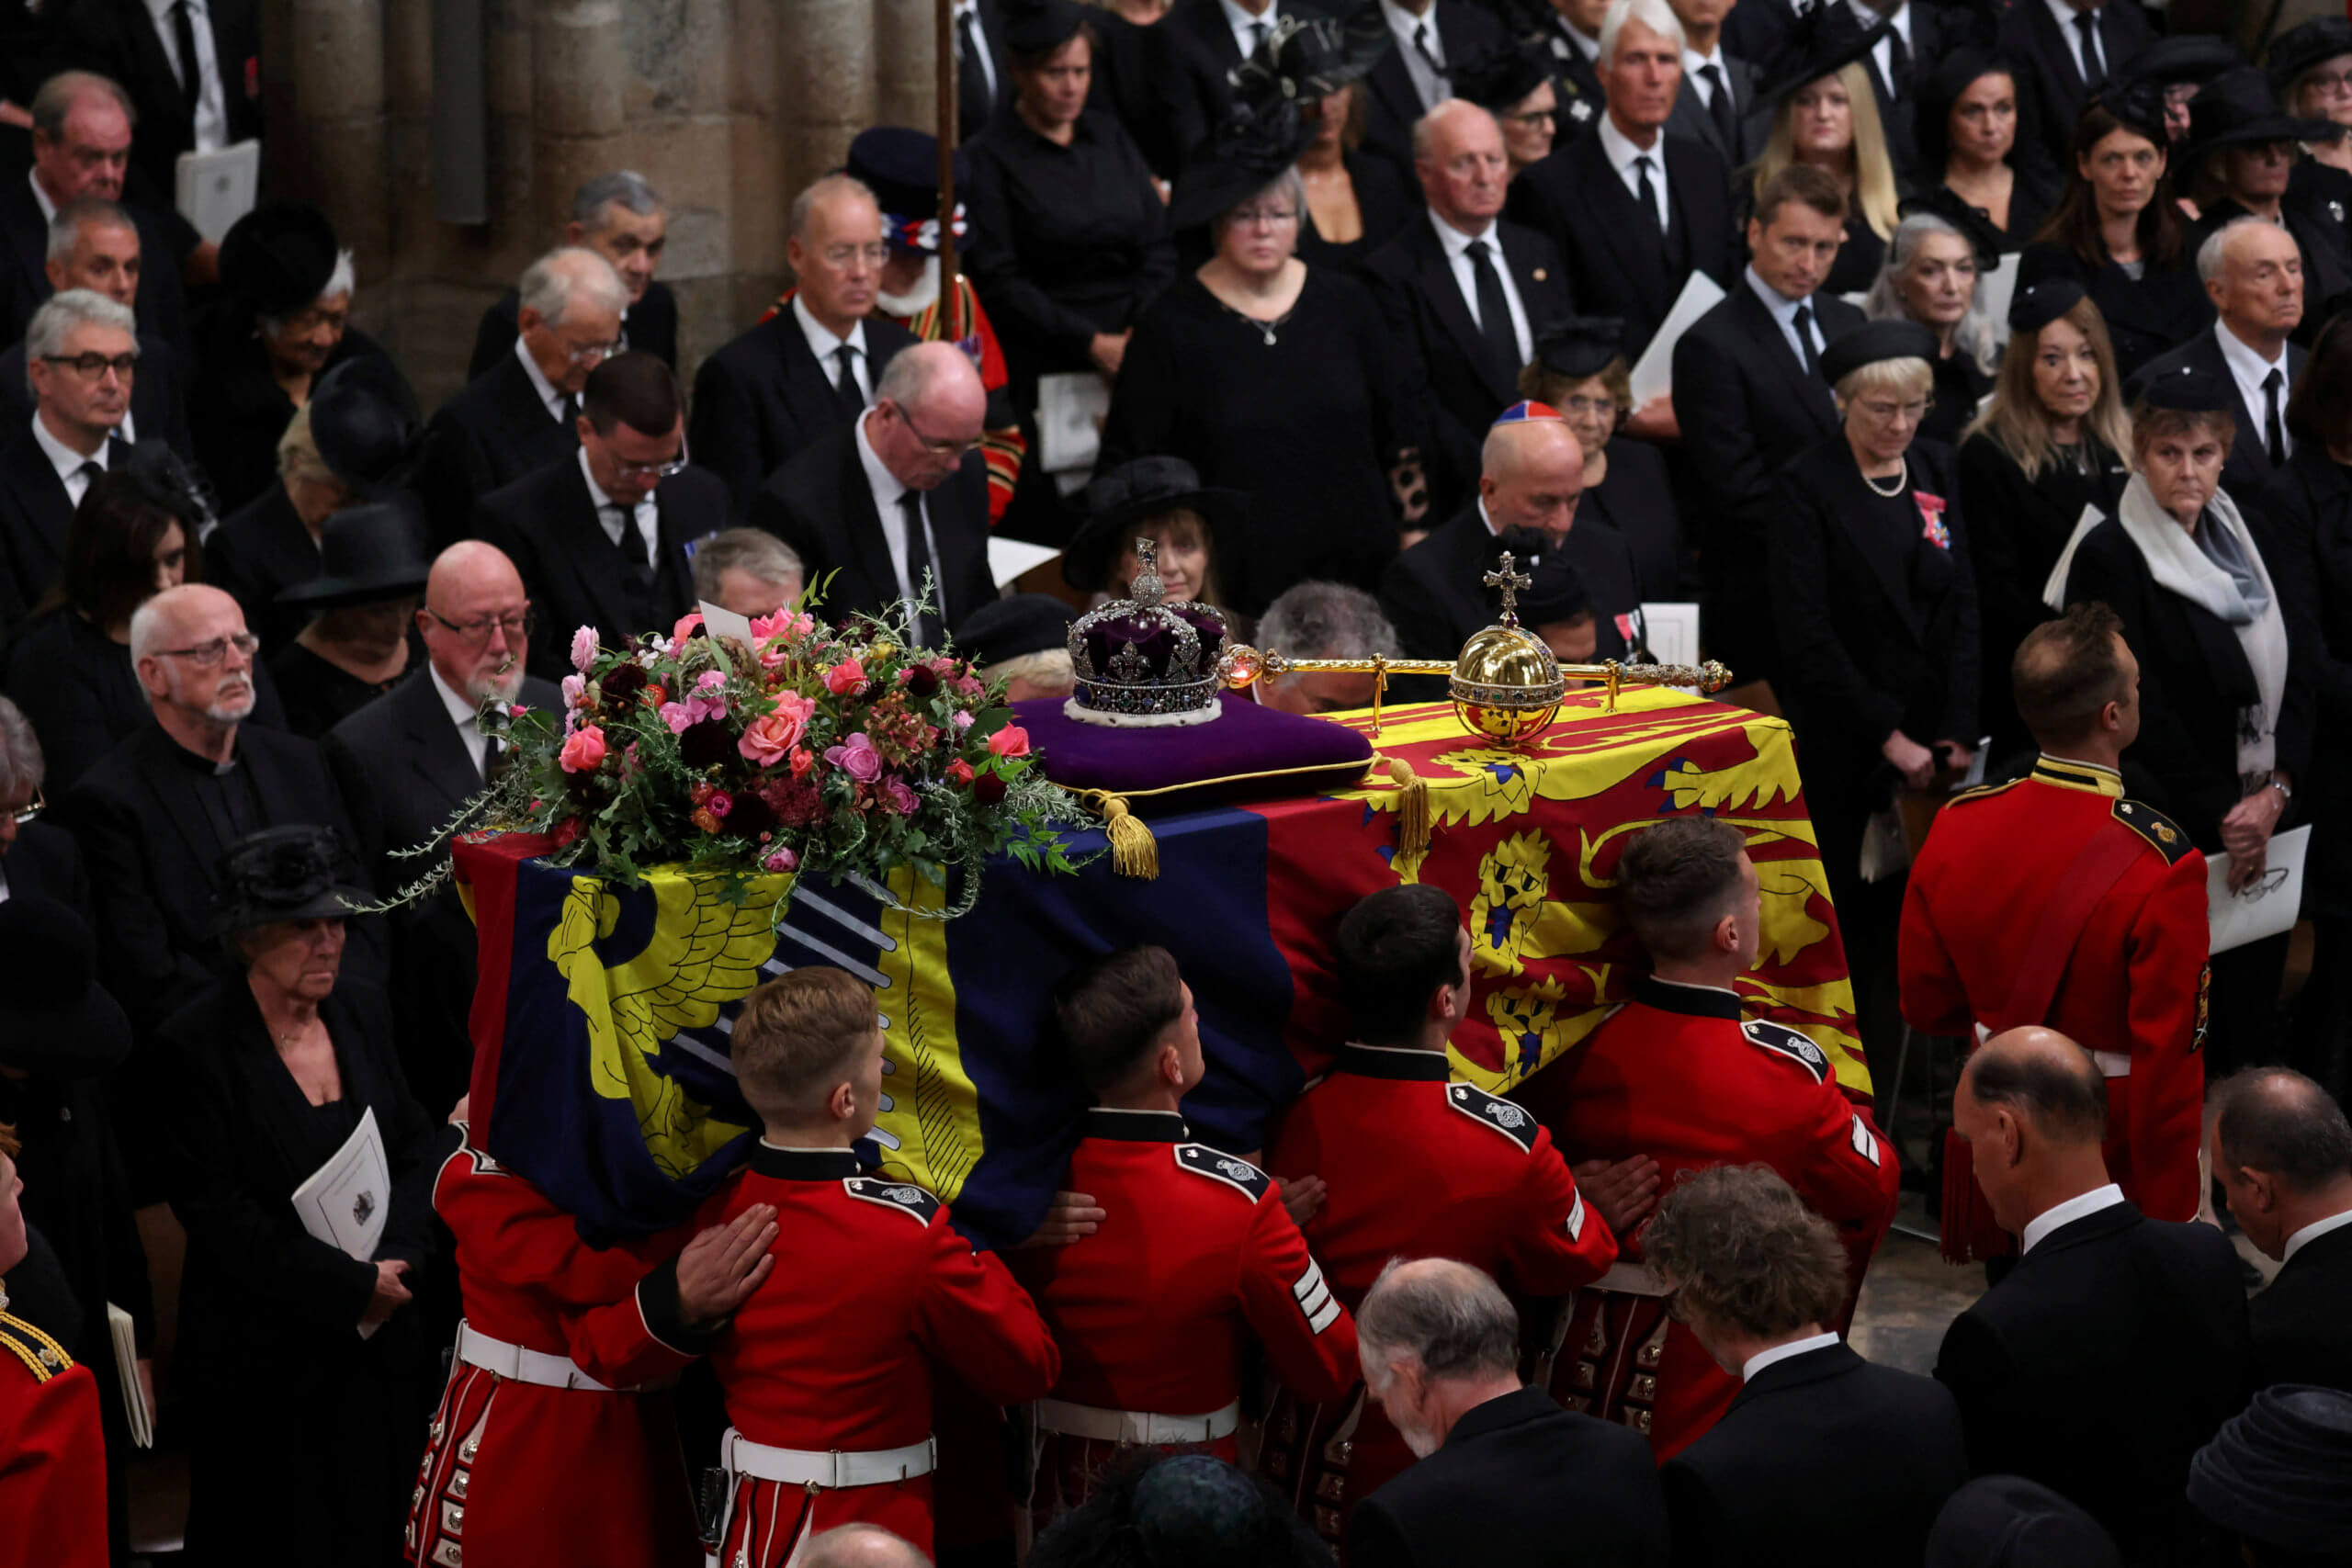 Britain's Queen Elizabeth's coffin is carried inside the Westminster Abbey, during her funeral in London, Monday Sept. 19, 2022. (Phil Noble/Pool Photo via AP)